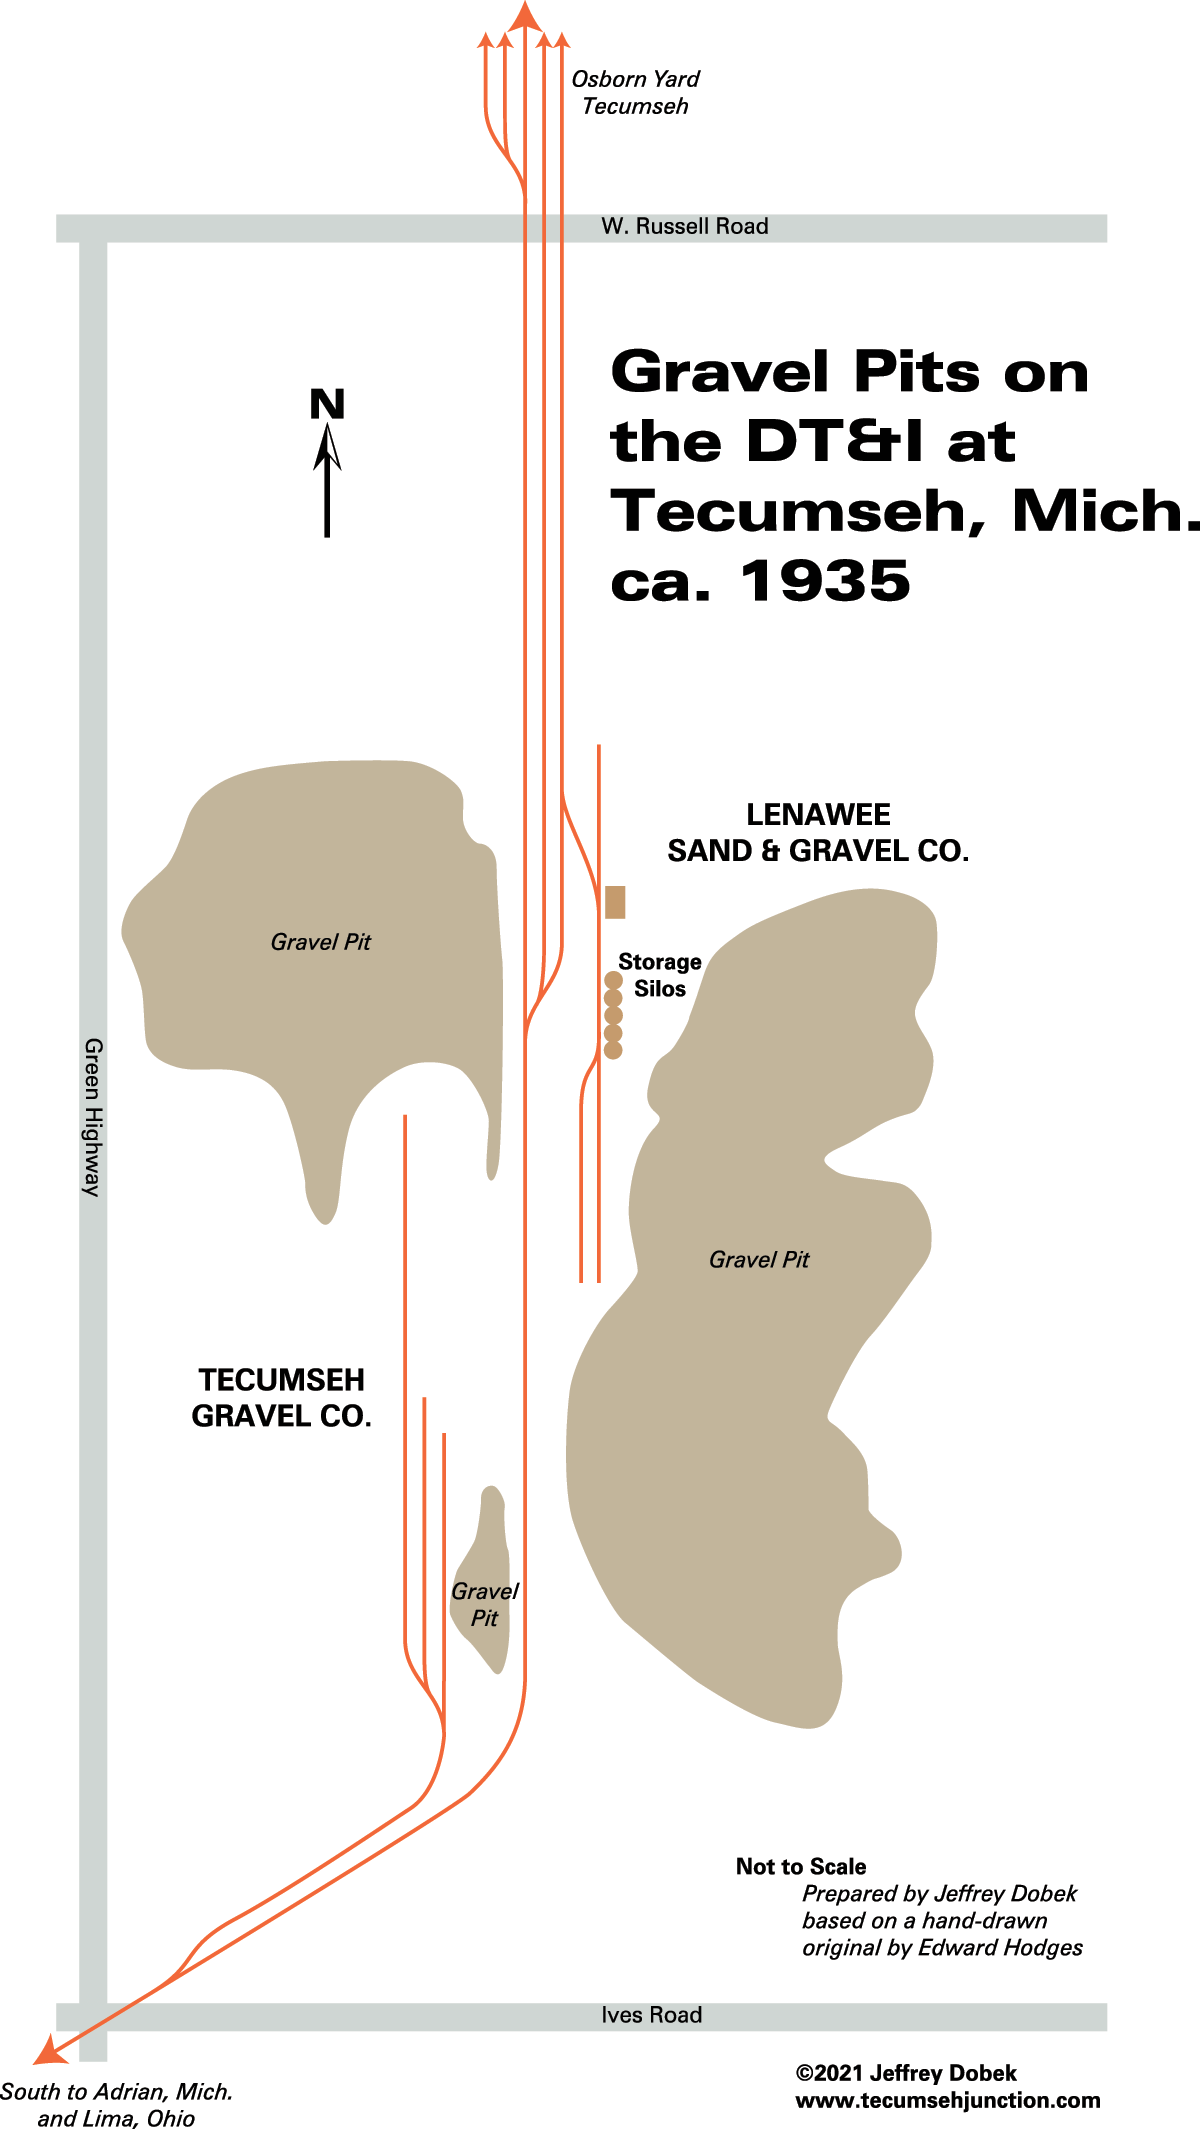 Gravel Pits on the DT&I at Tecumseh, Mich. ca. 1935